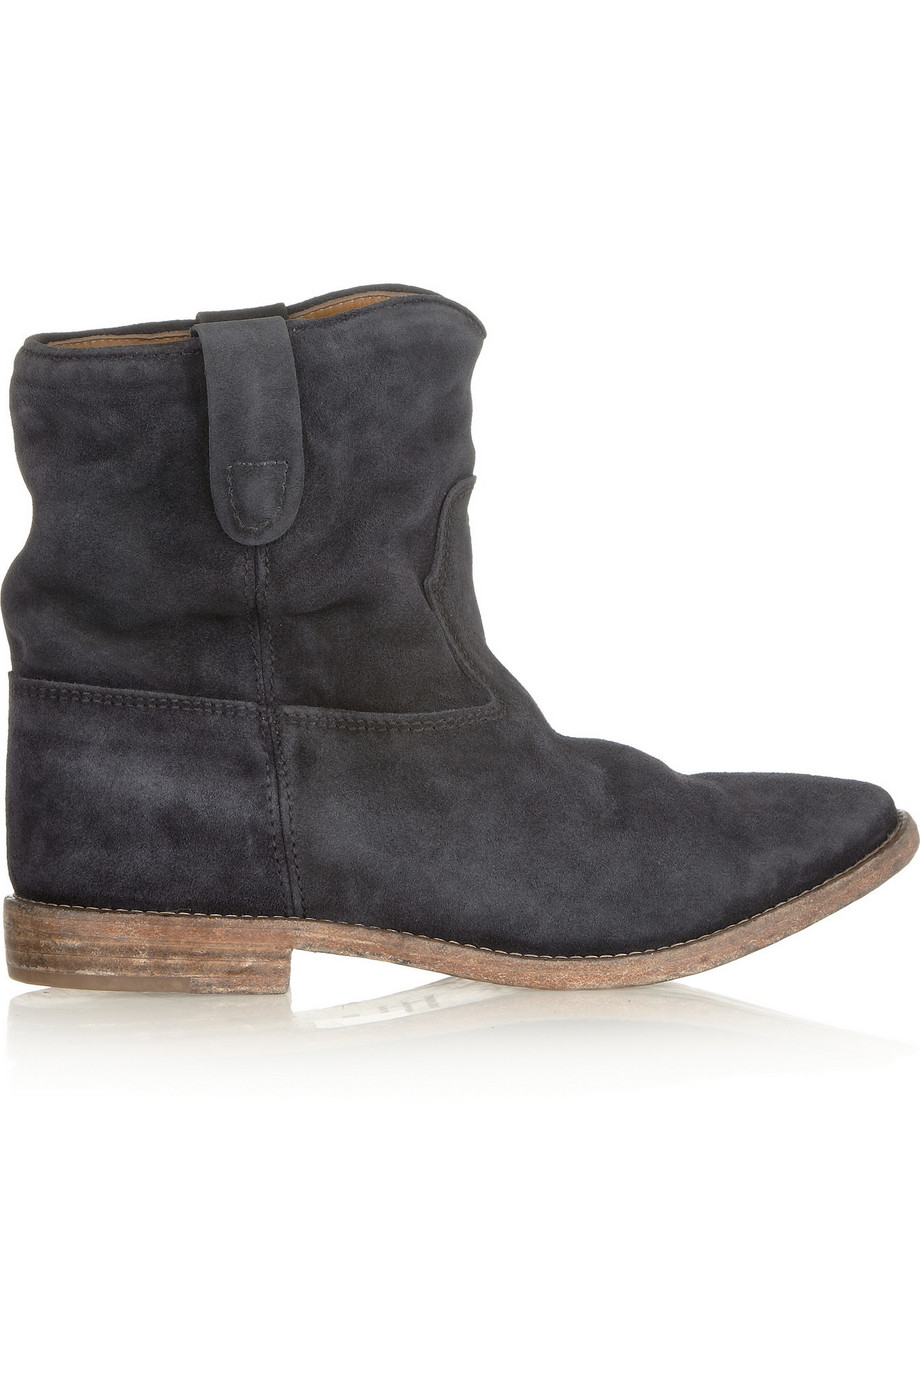 Isabel Marant Crisi Ankle Boots Faded-Anthracite Suede — UFO No